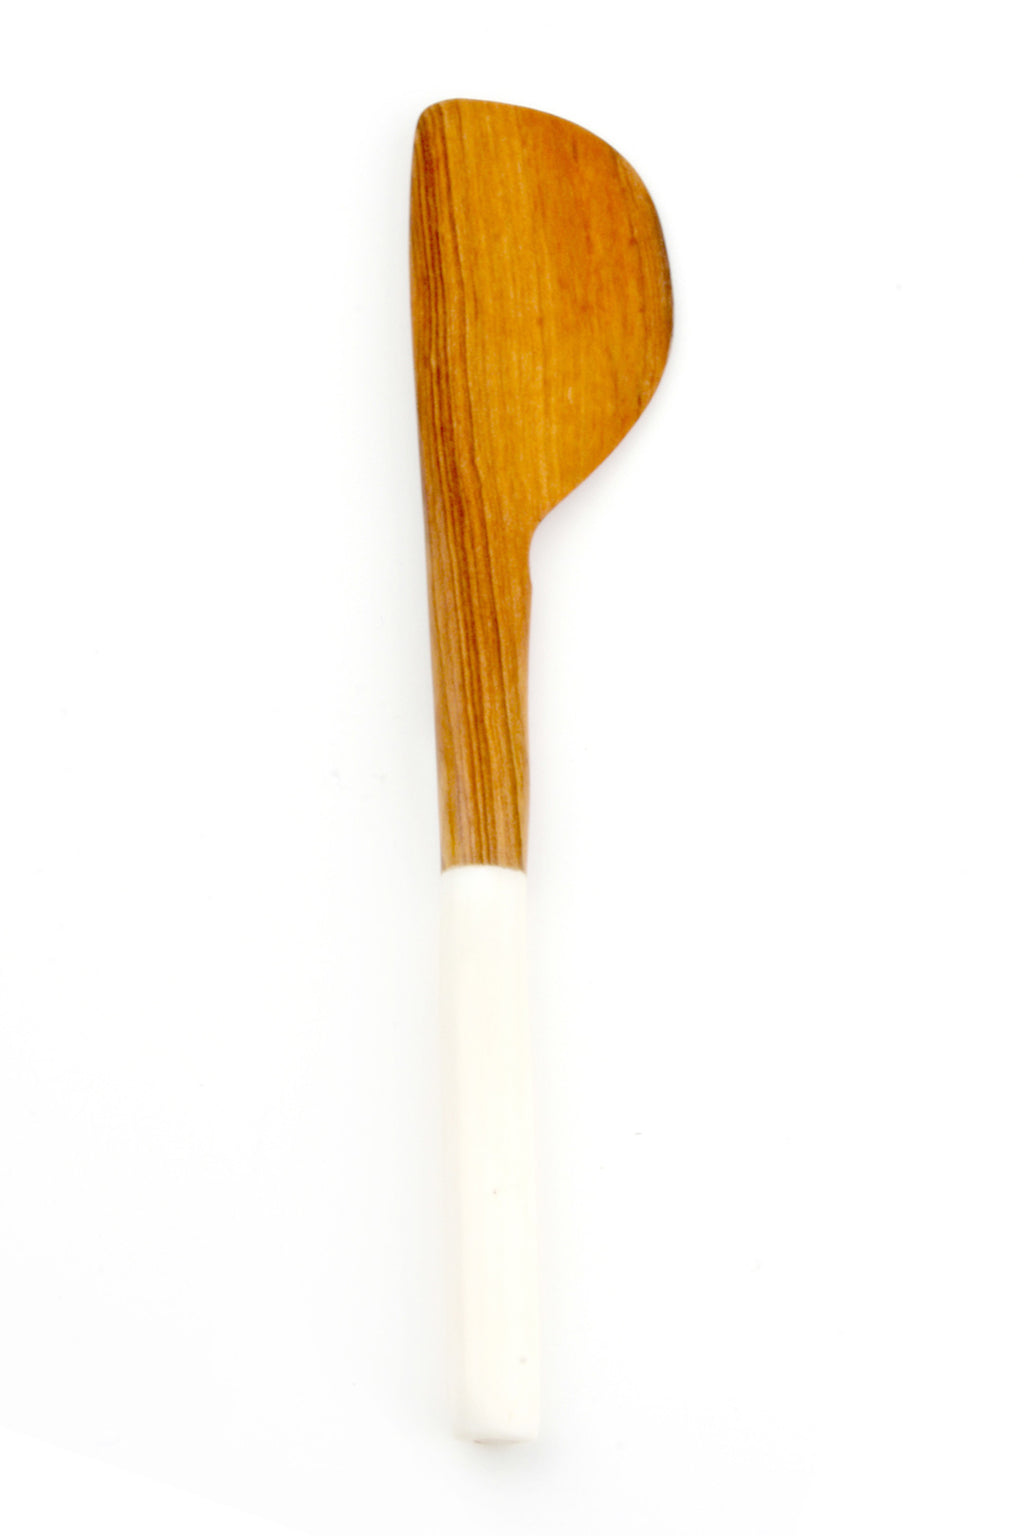 Wild Olive Wood Butter Spreader with White Bone Handle Default Title